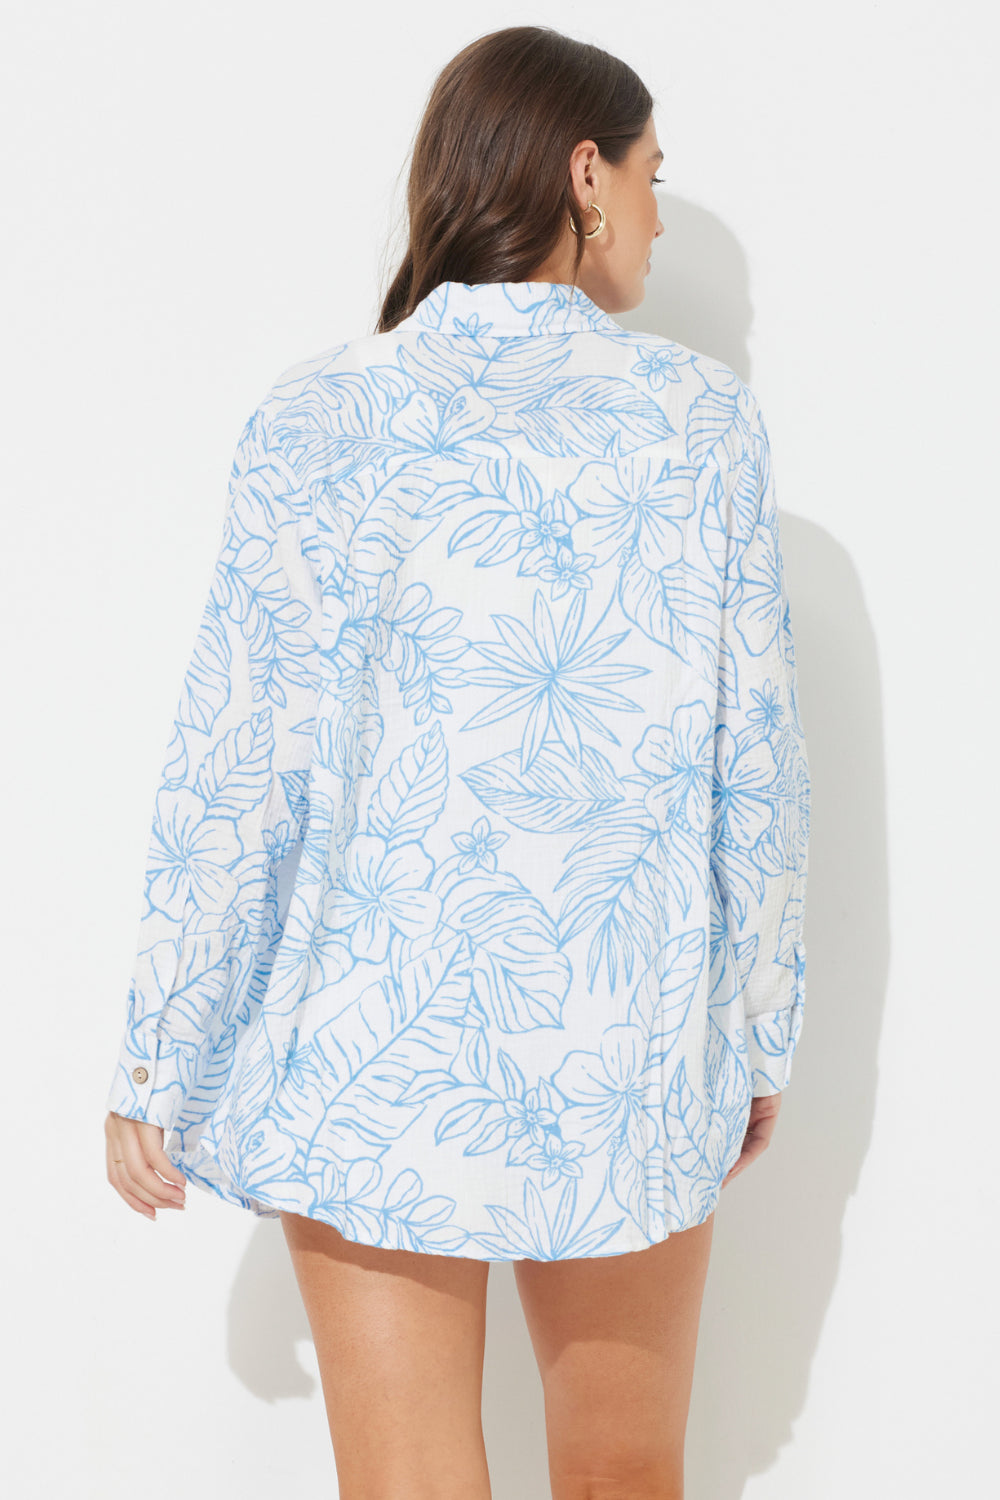 OCEAN DRIVE- PRINTED GAUZE LS BUTTON UP